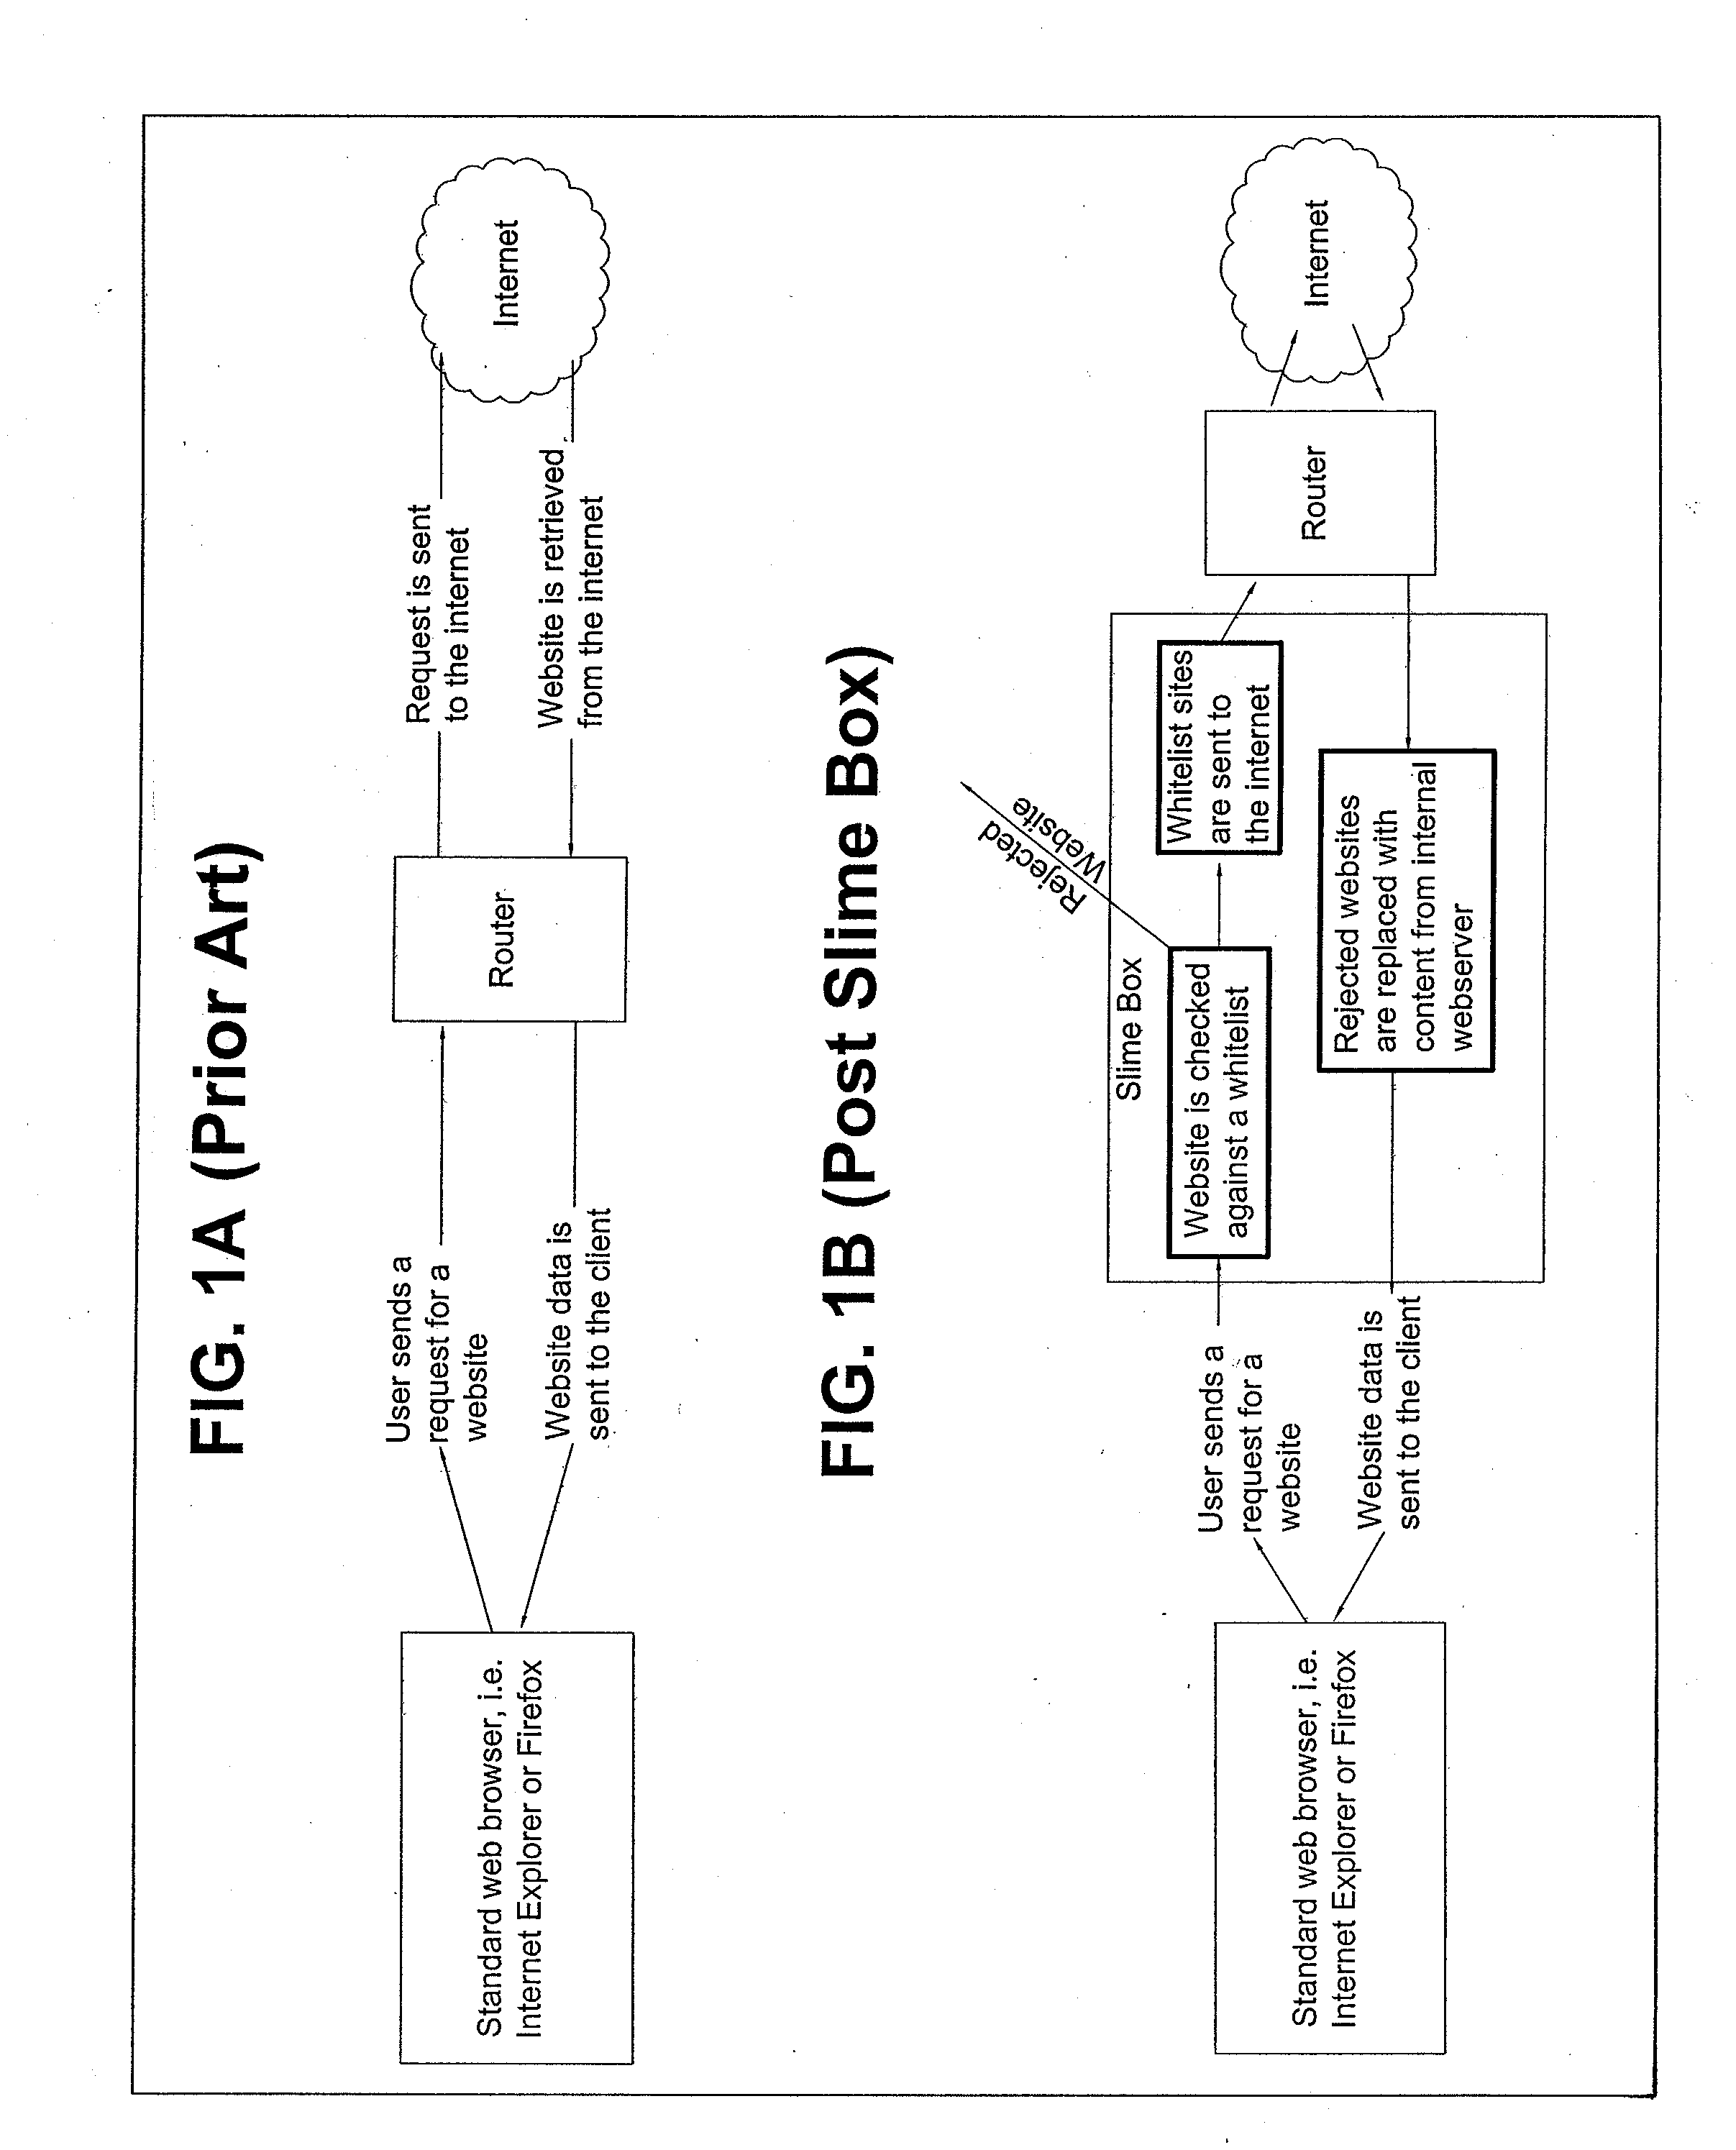 System and method for filtering internet content & blocking undesired websites by secure network appliance